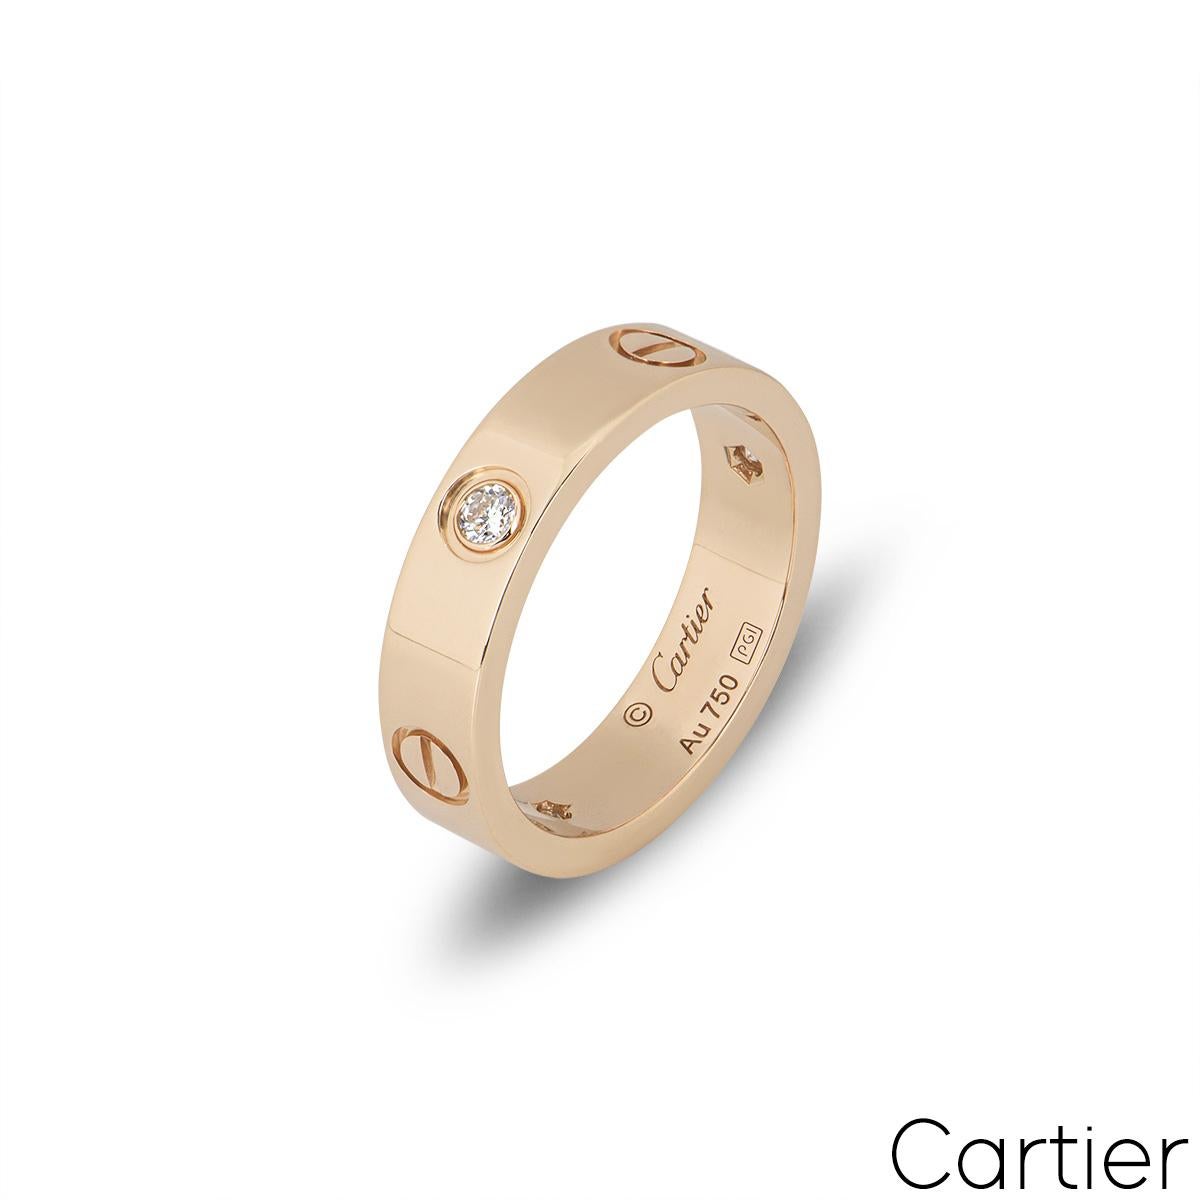 A lovely 18k rose gold ring from the Love collection, by Cartier. Set with 3 round brilliant cut diamonds in a rubover setting totalling 0.22ct, alternating between the iconic screw motif design through the centre of the band. The 5.5mm wide ring is